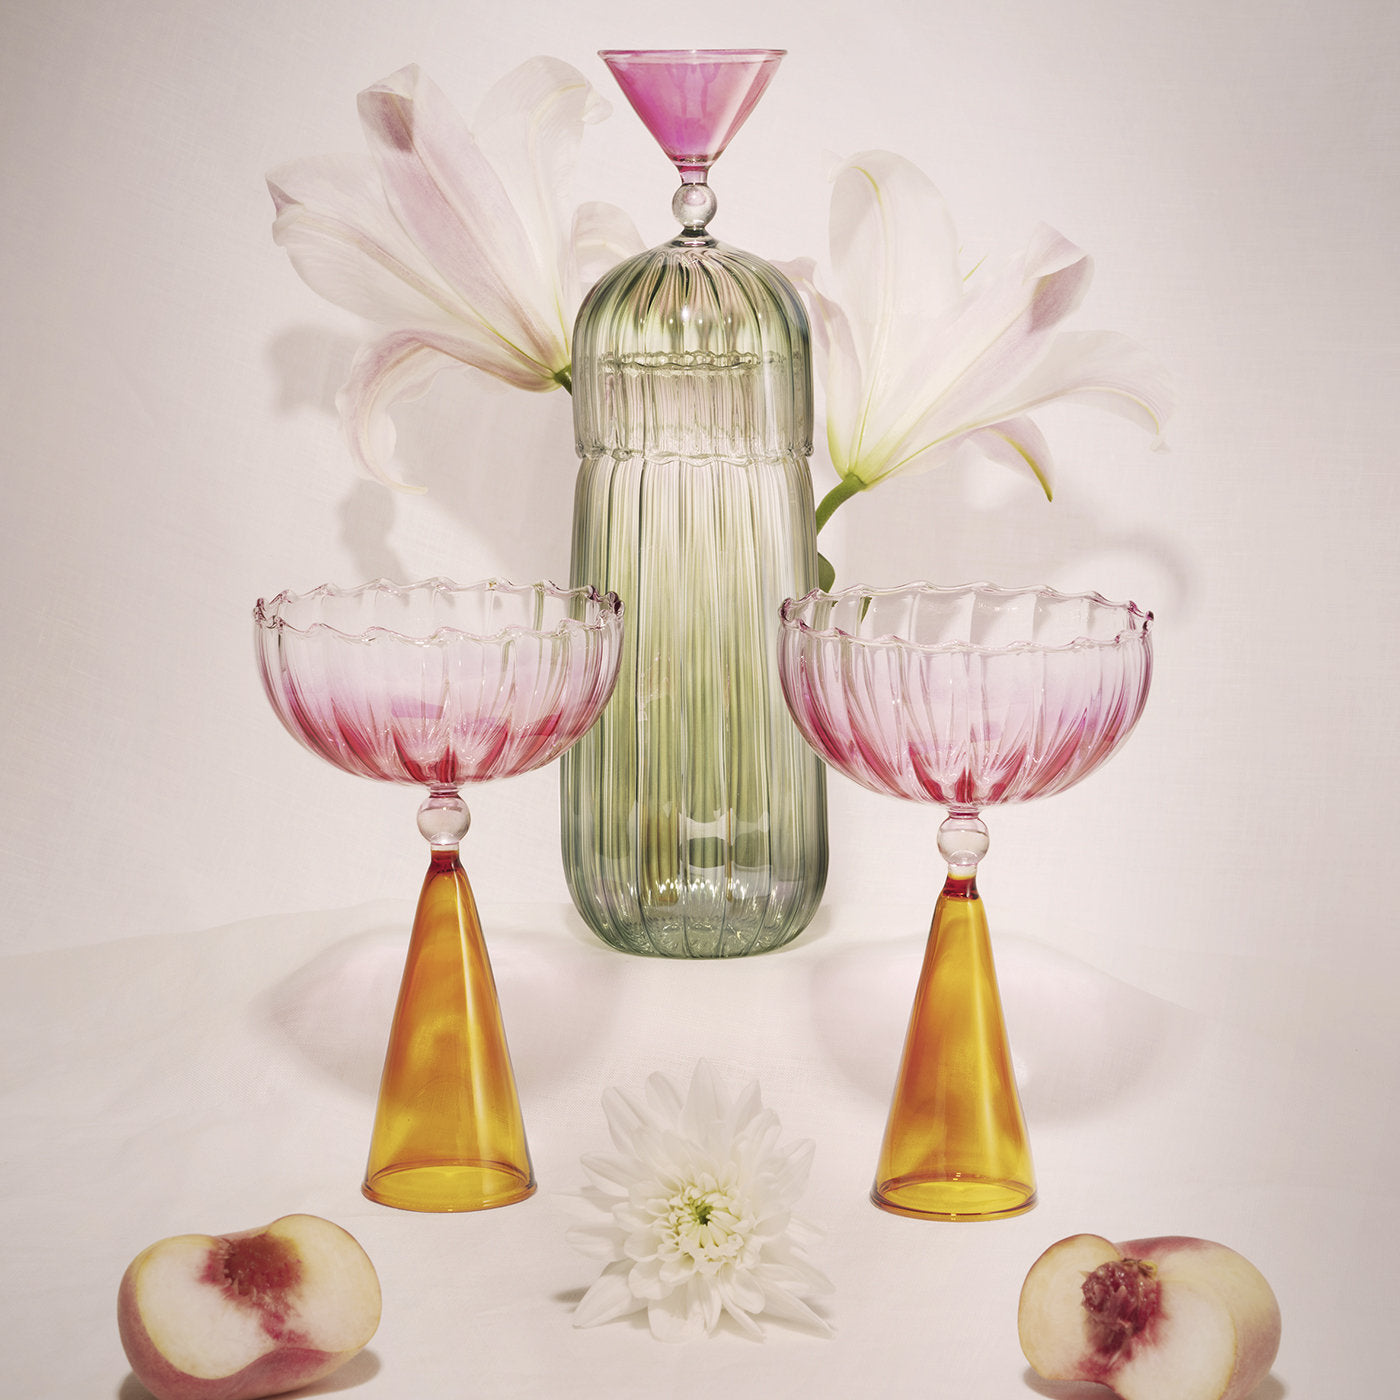 Set of 2 Calypso Pink and Amber Wine Glasses - Alternative view 1